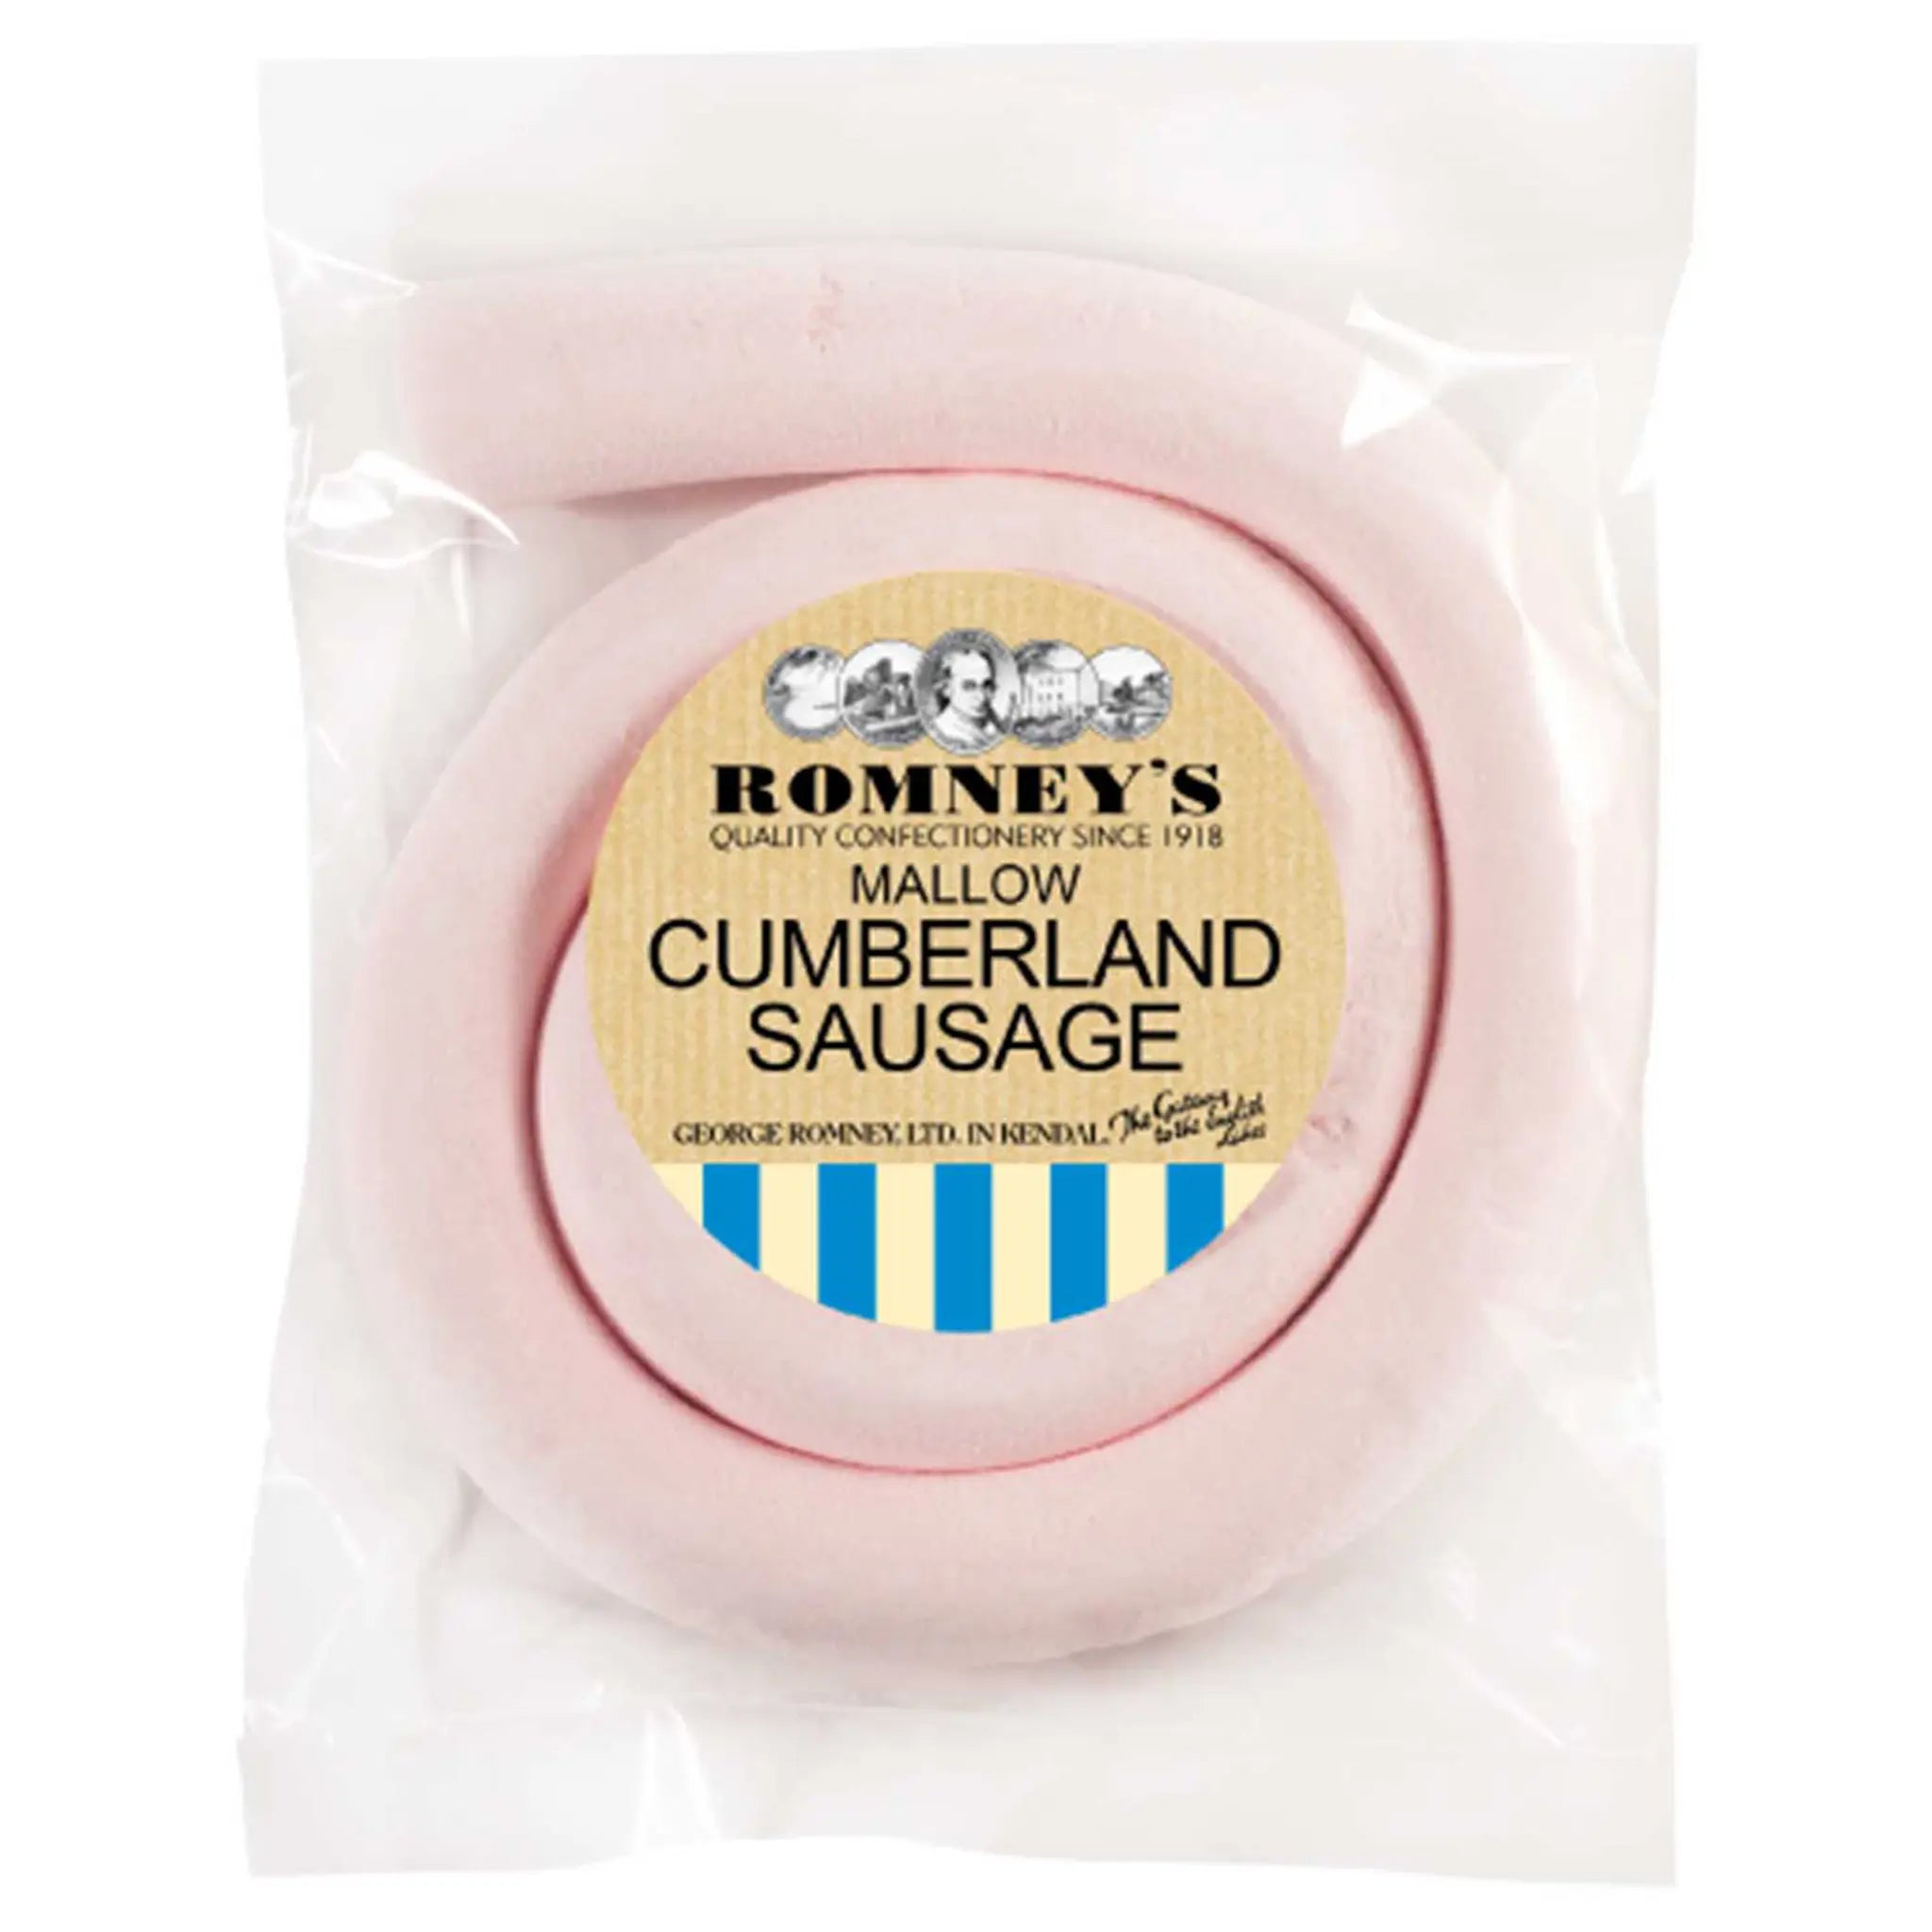 A transparent square wrapper containing a curled up Marshmallow. The bag has a sticker on it that features the Romney's logo and the words 'Mallow Cumberland Sausage'.